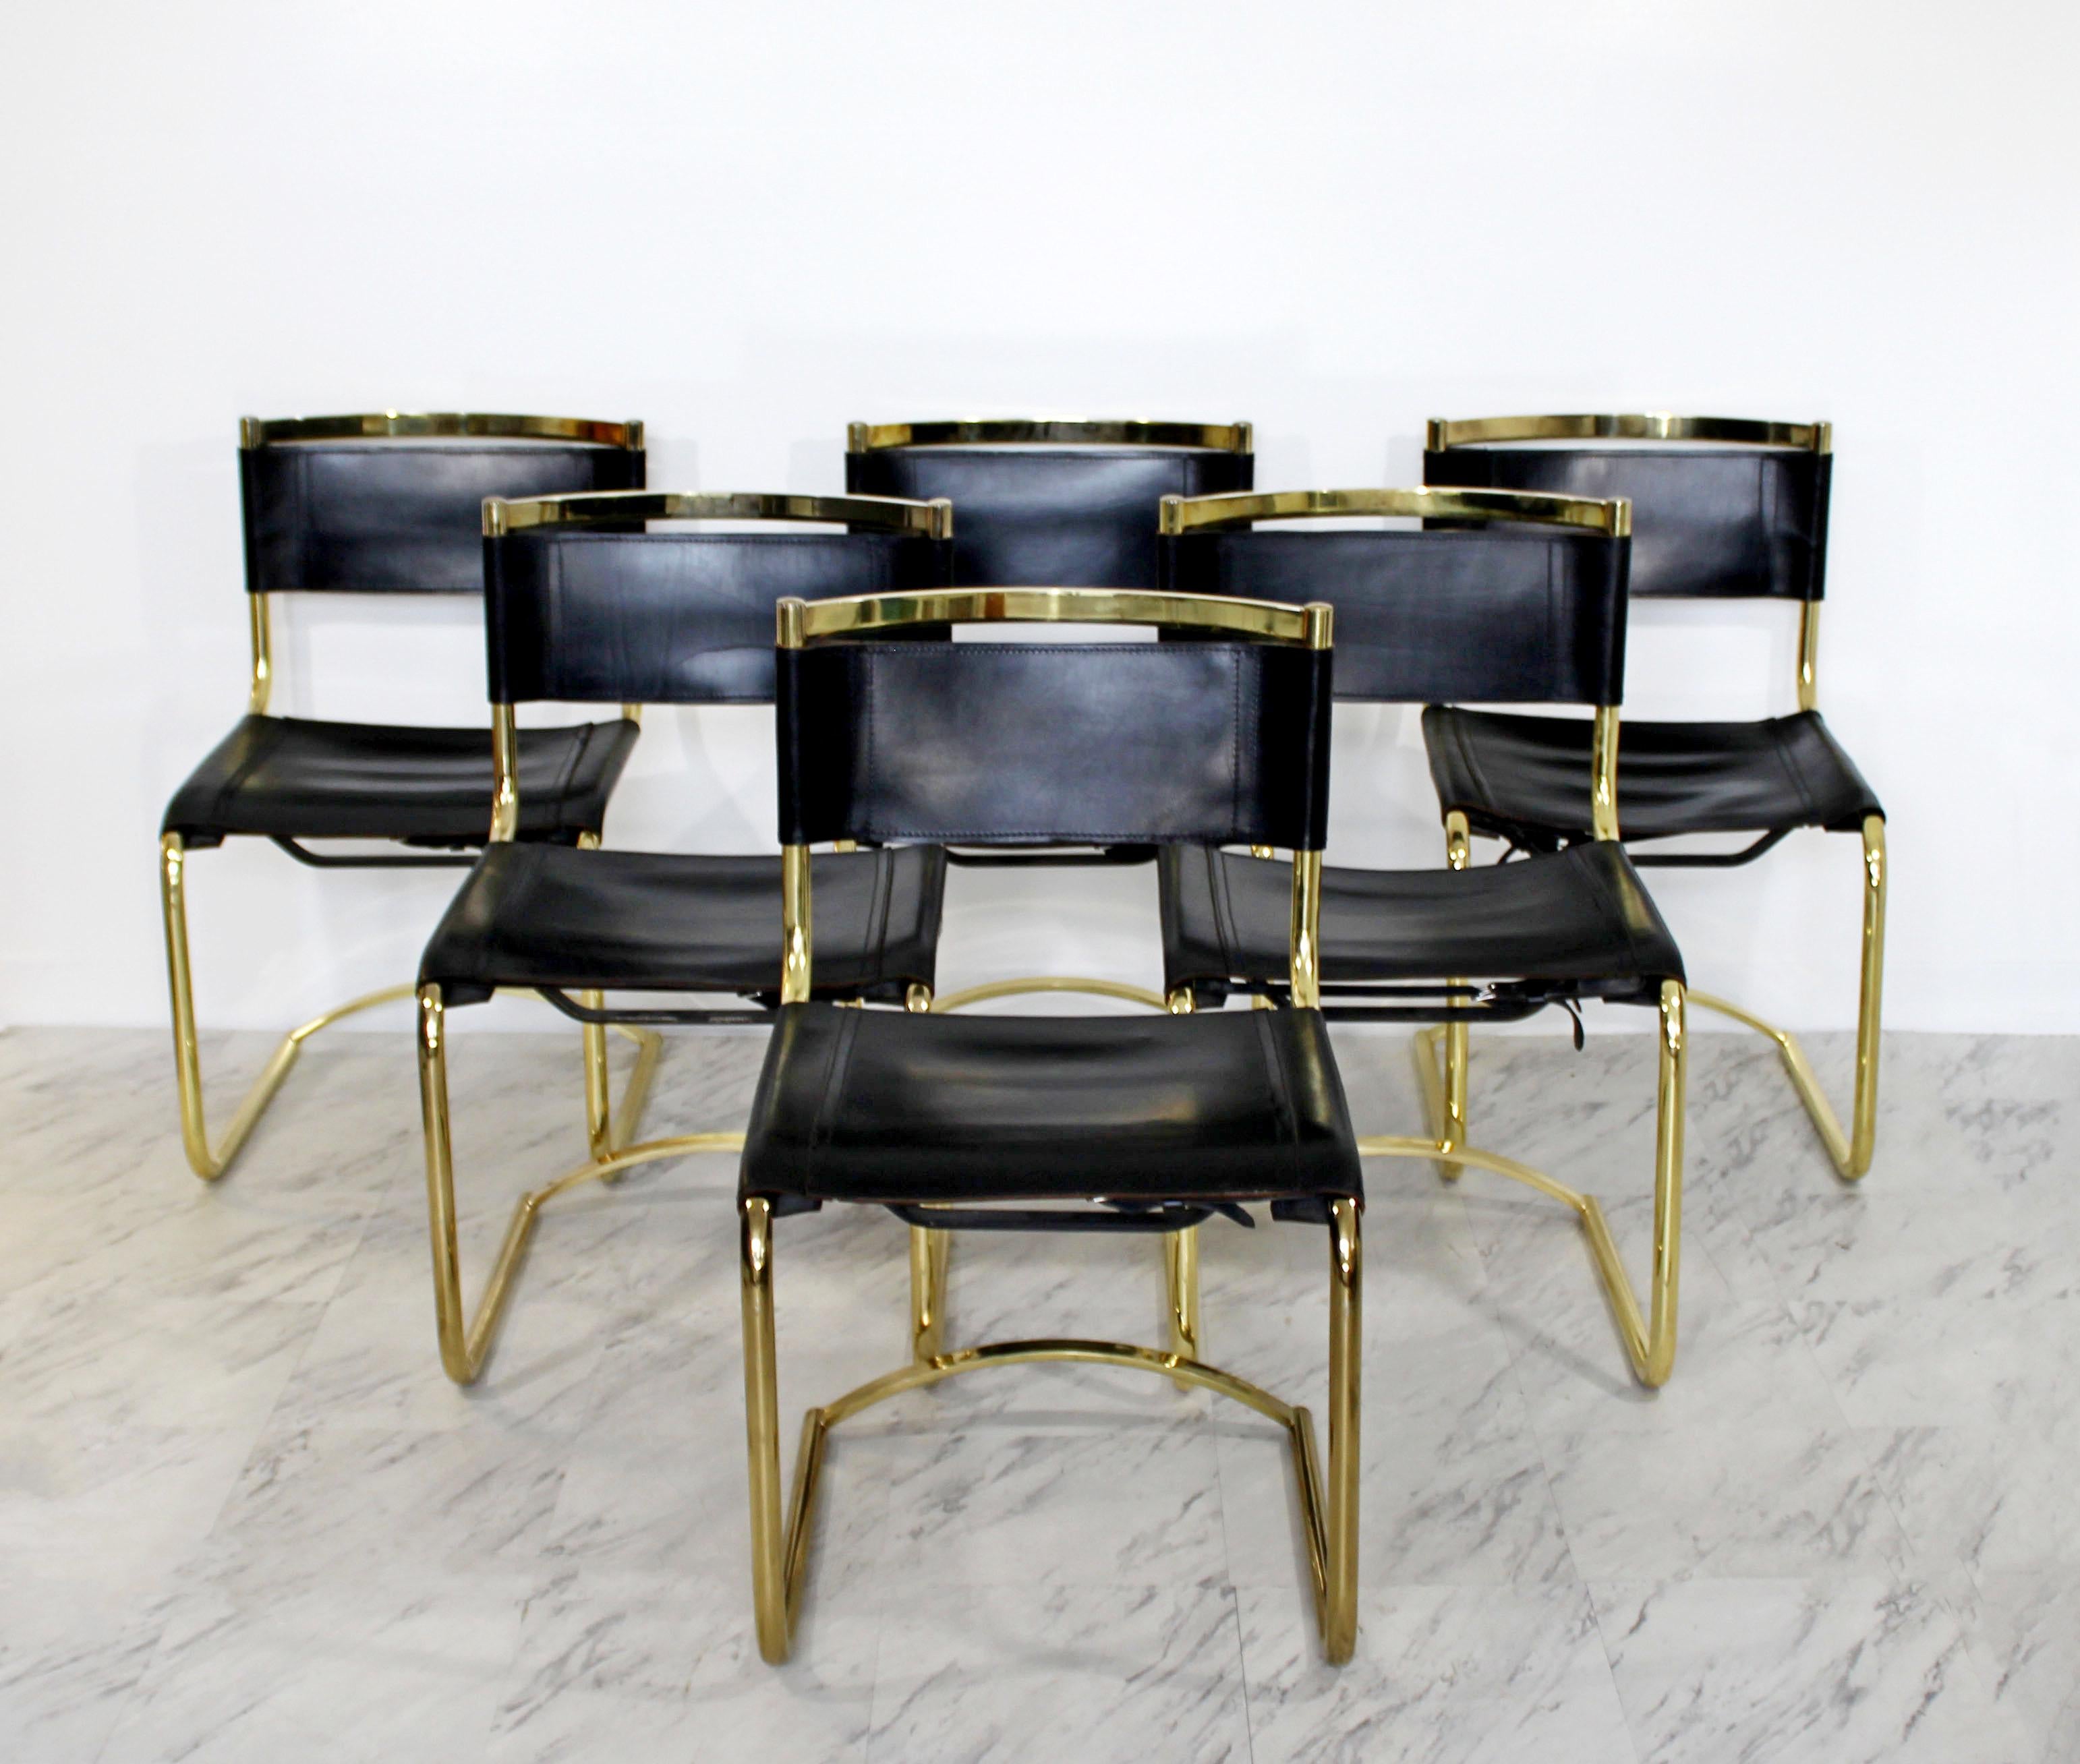 For your consideration is an incredible, rare, set of eight side dining chairs, made of curved brass and black leather, in the style of Breuer, circa 1970s. In very good condition. The dimensions are 19